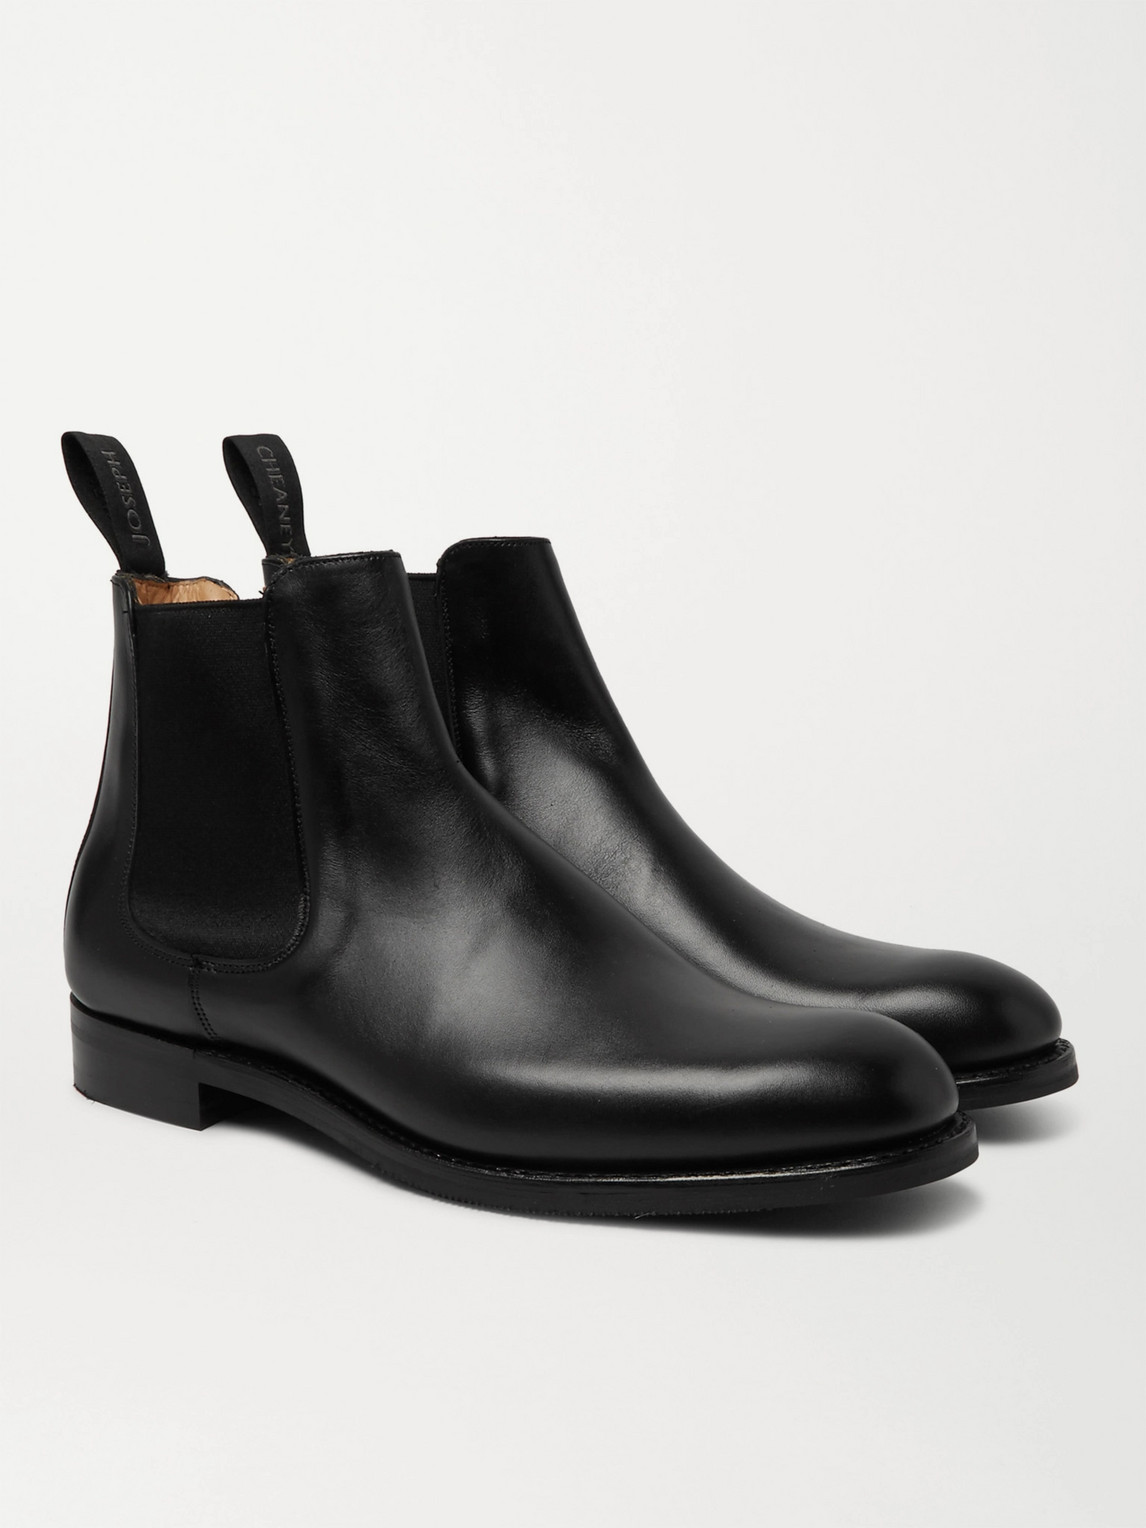 Cheaney Godfrey Leather Chelsea Boots In Black | ModeSens